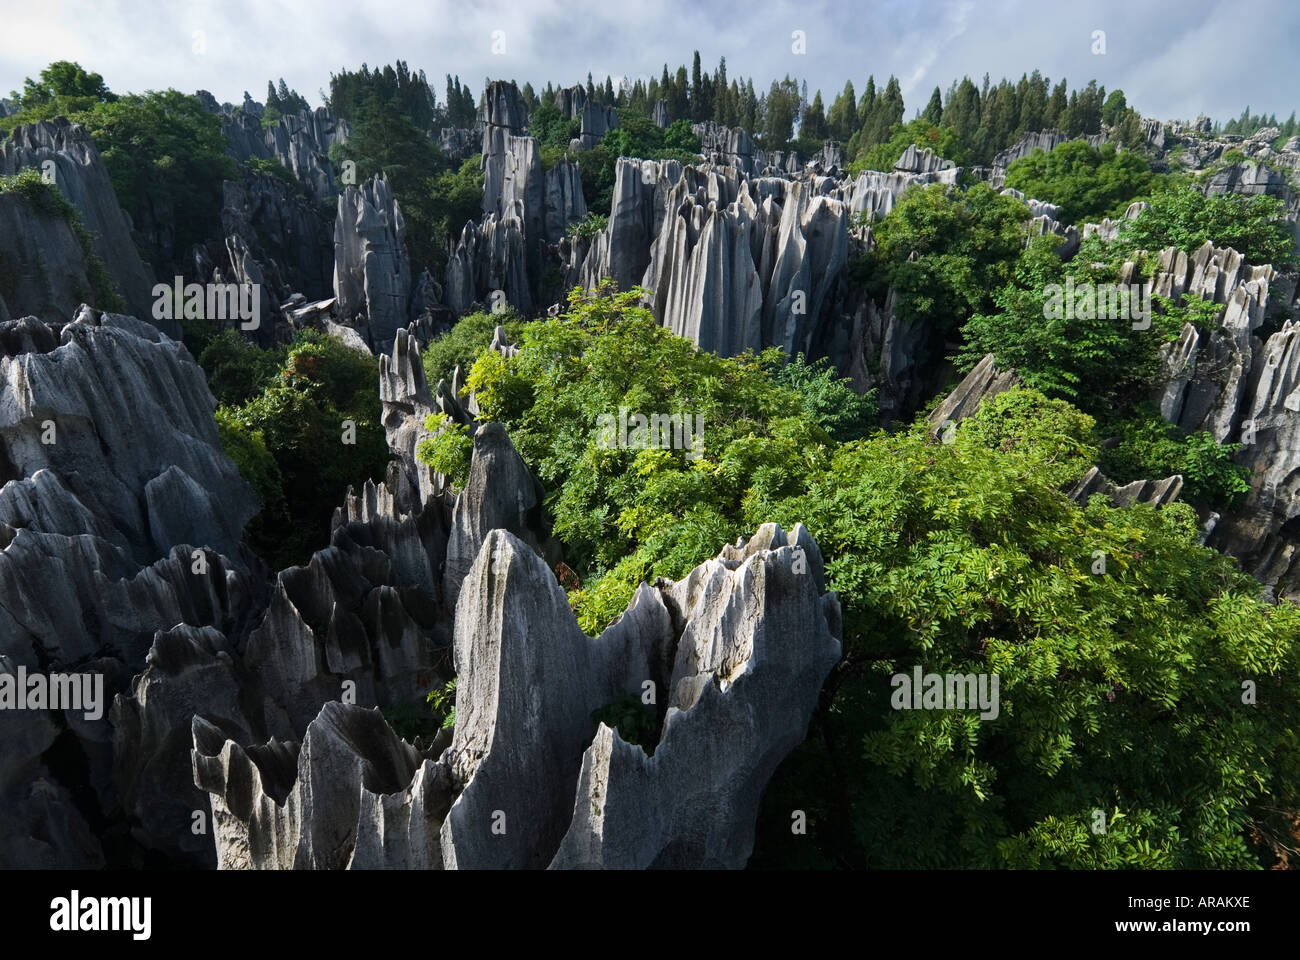 Eroded by water over millions of years towering Karst limesone formations form the Stone Forest Shilin Yunnan Province China Stock Photo